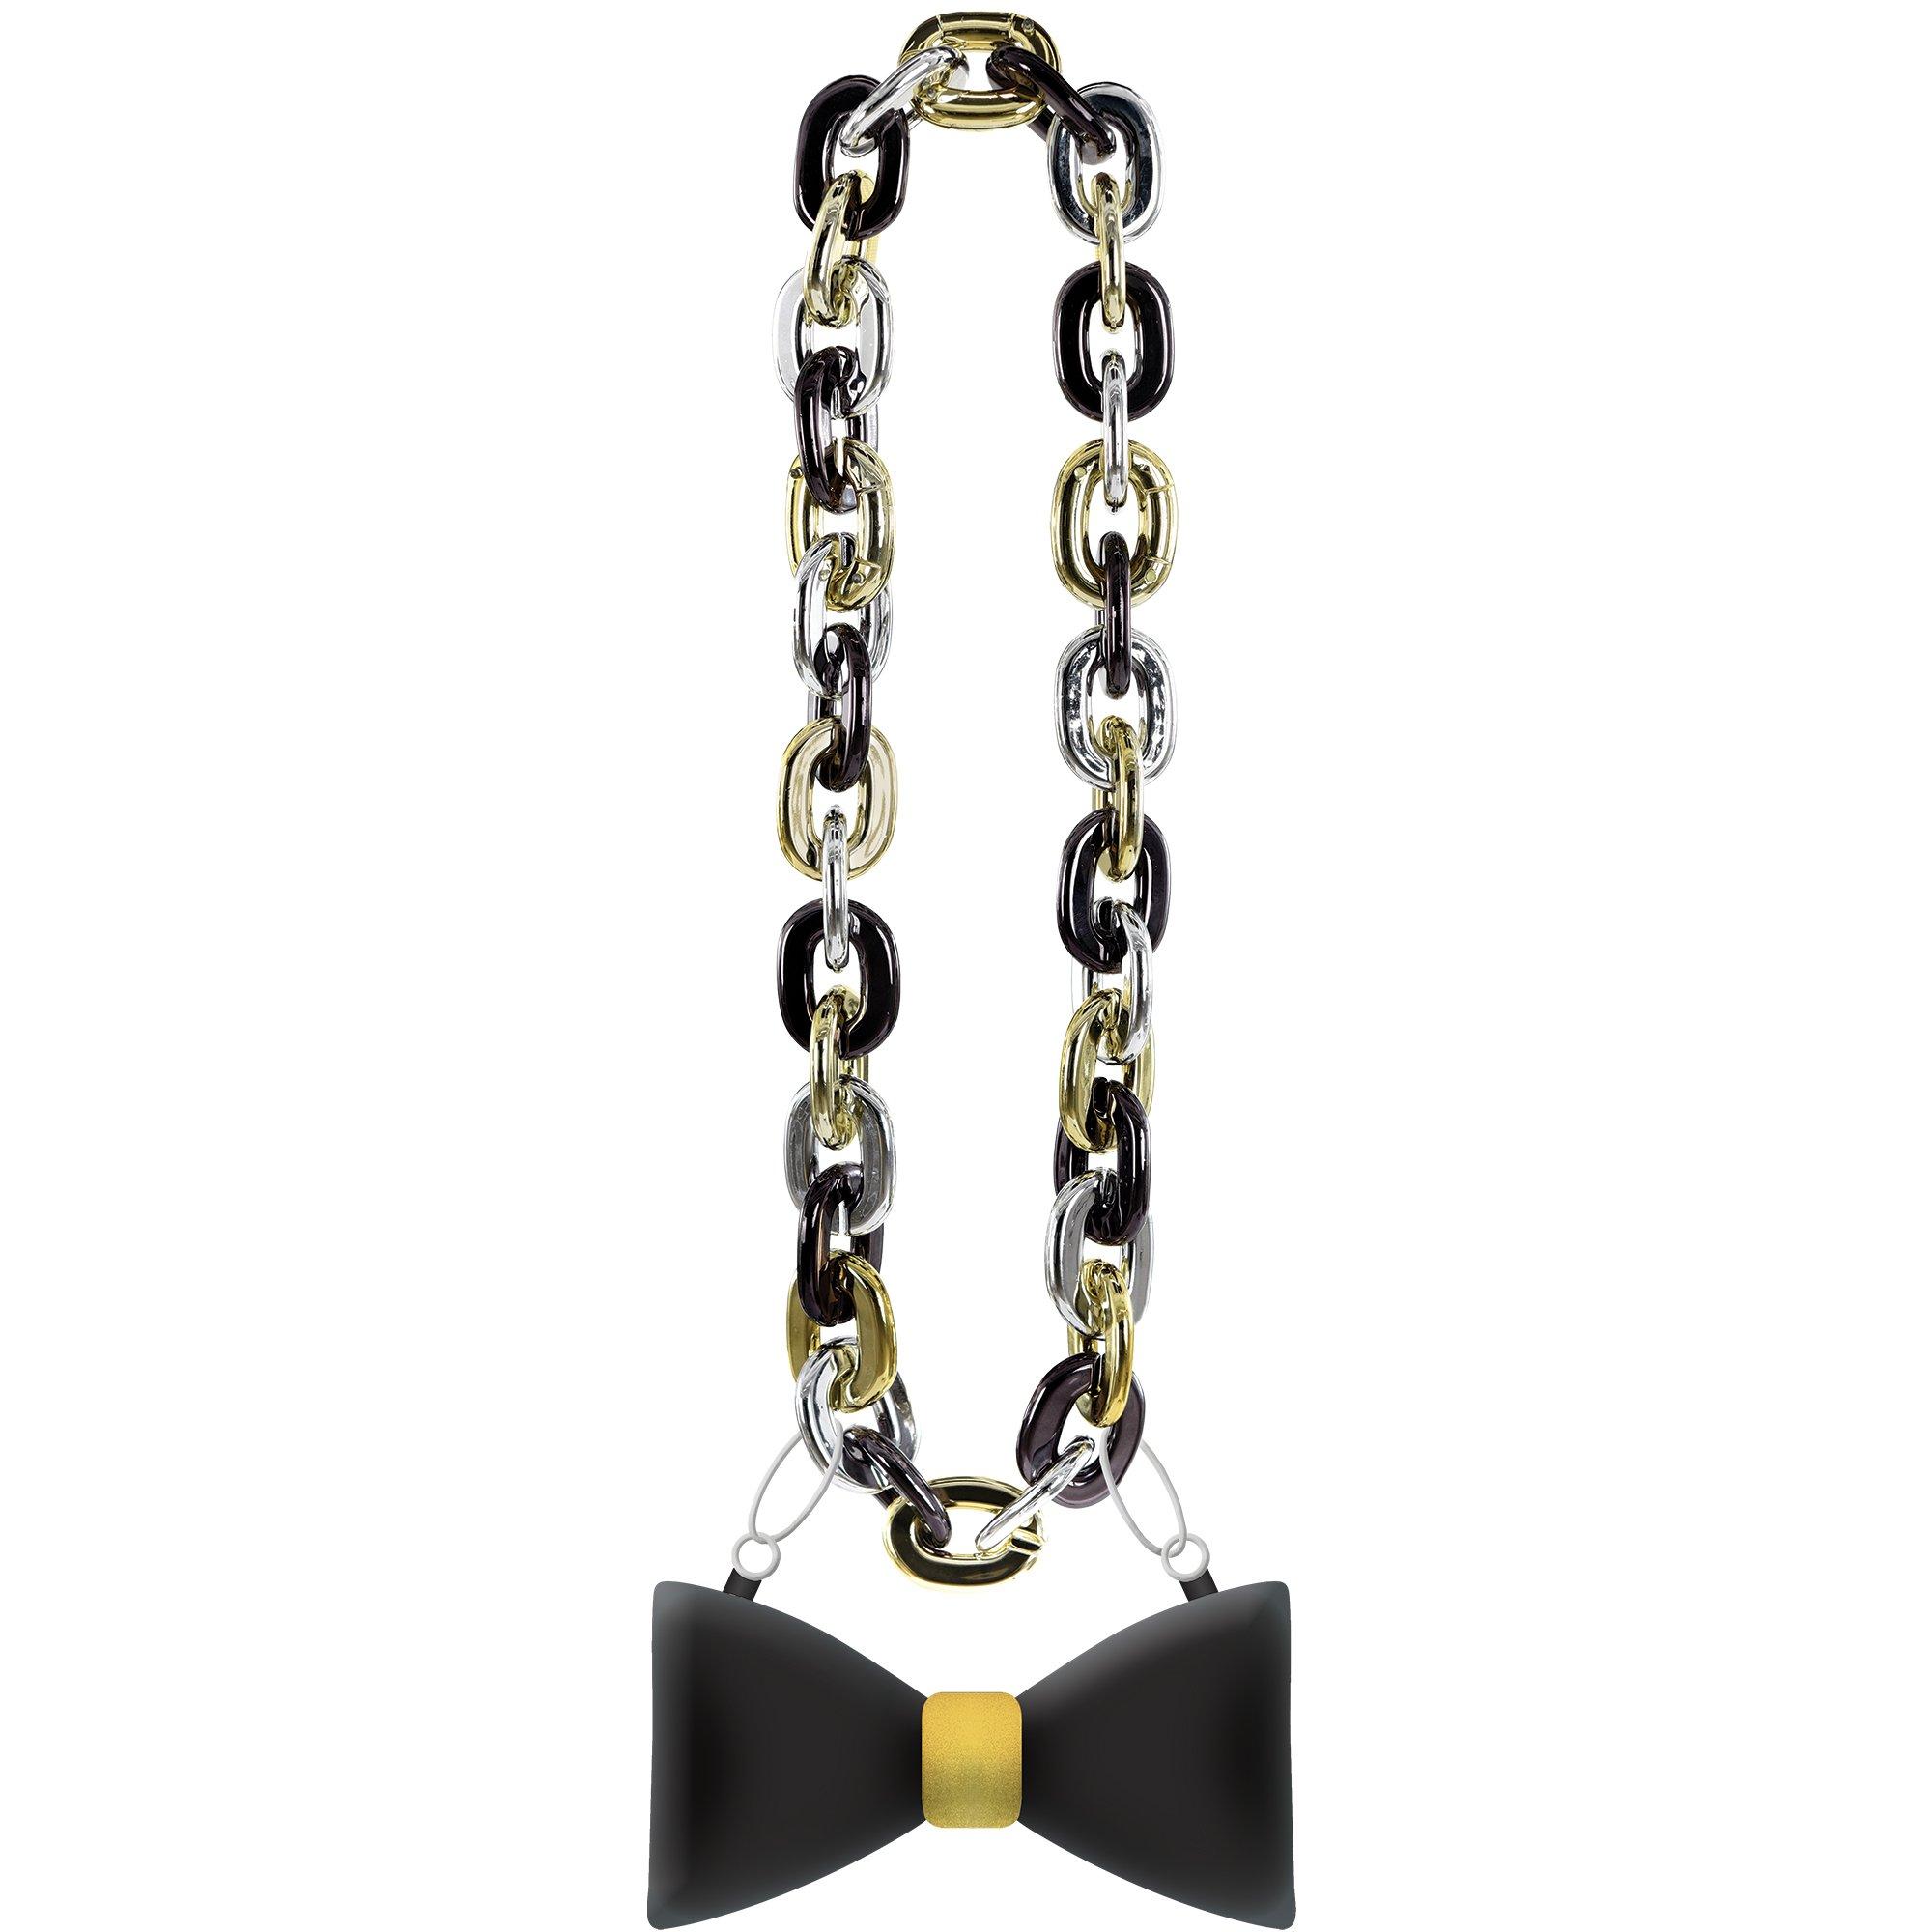 Black, Silver, & Gold New Year's Eve Bowtie Pendant Chain Necklace